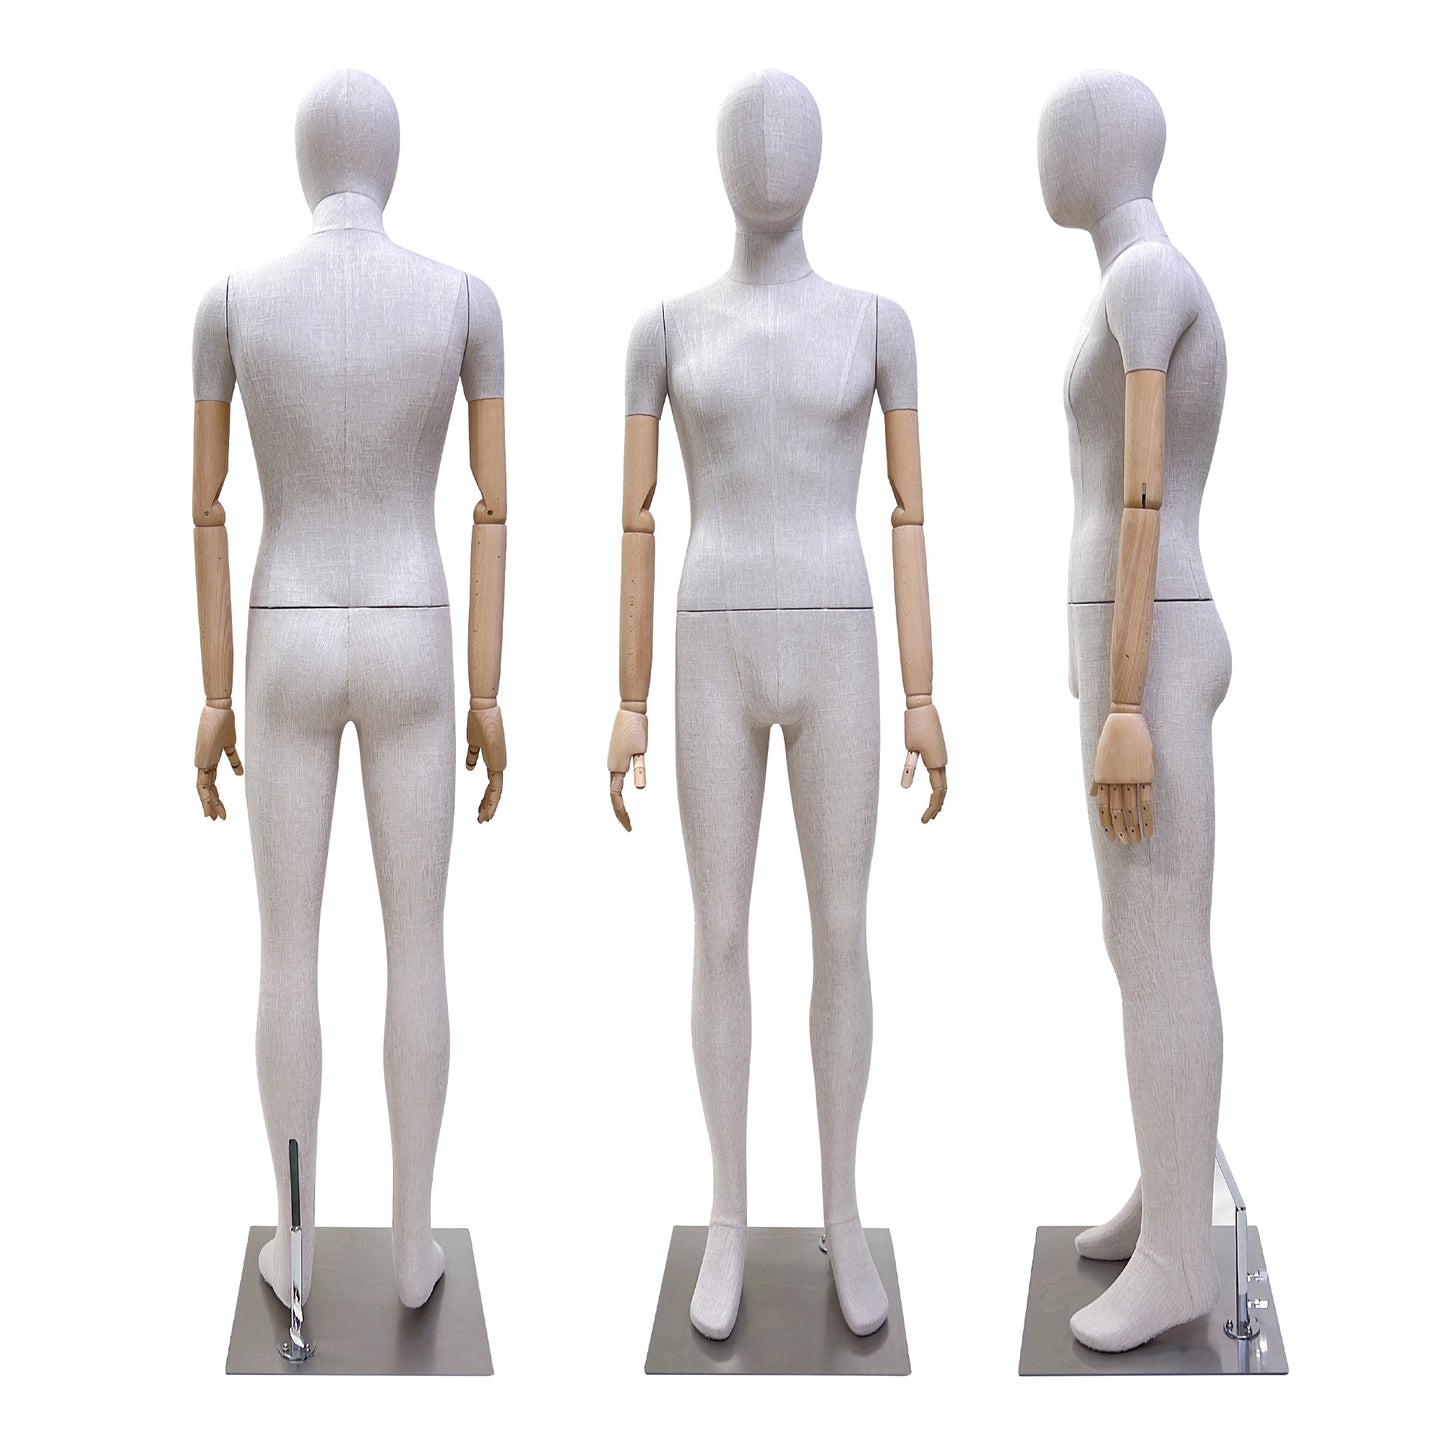 New Luxury Style LInen Mannequin,Female/Male Full Body/Half Body Mannequin,Wedding Dress Display,Mannequin for Clothes Show,Shop Display